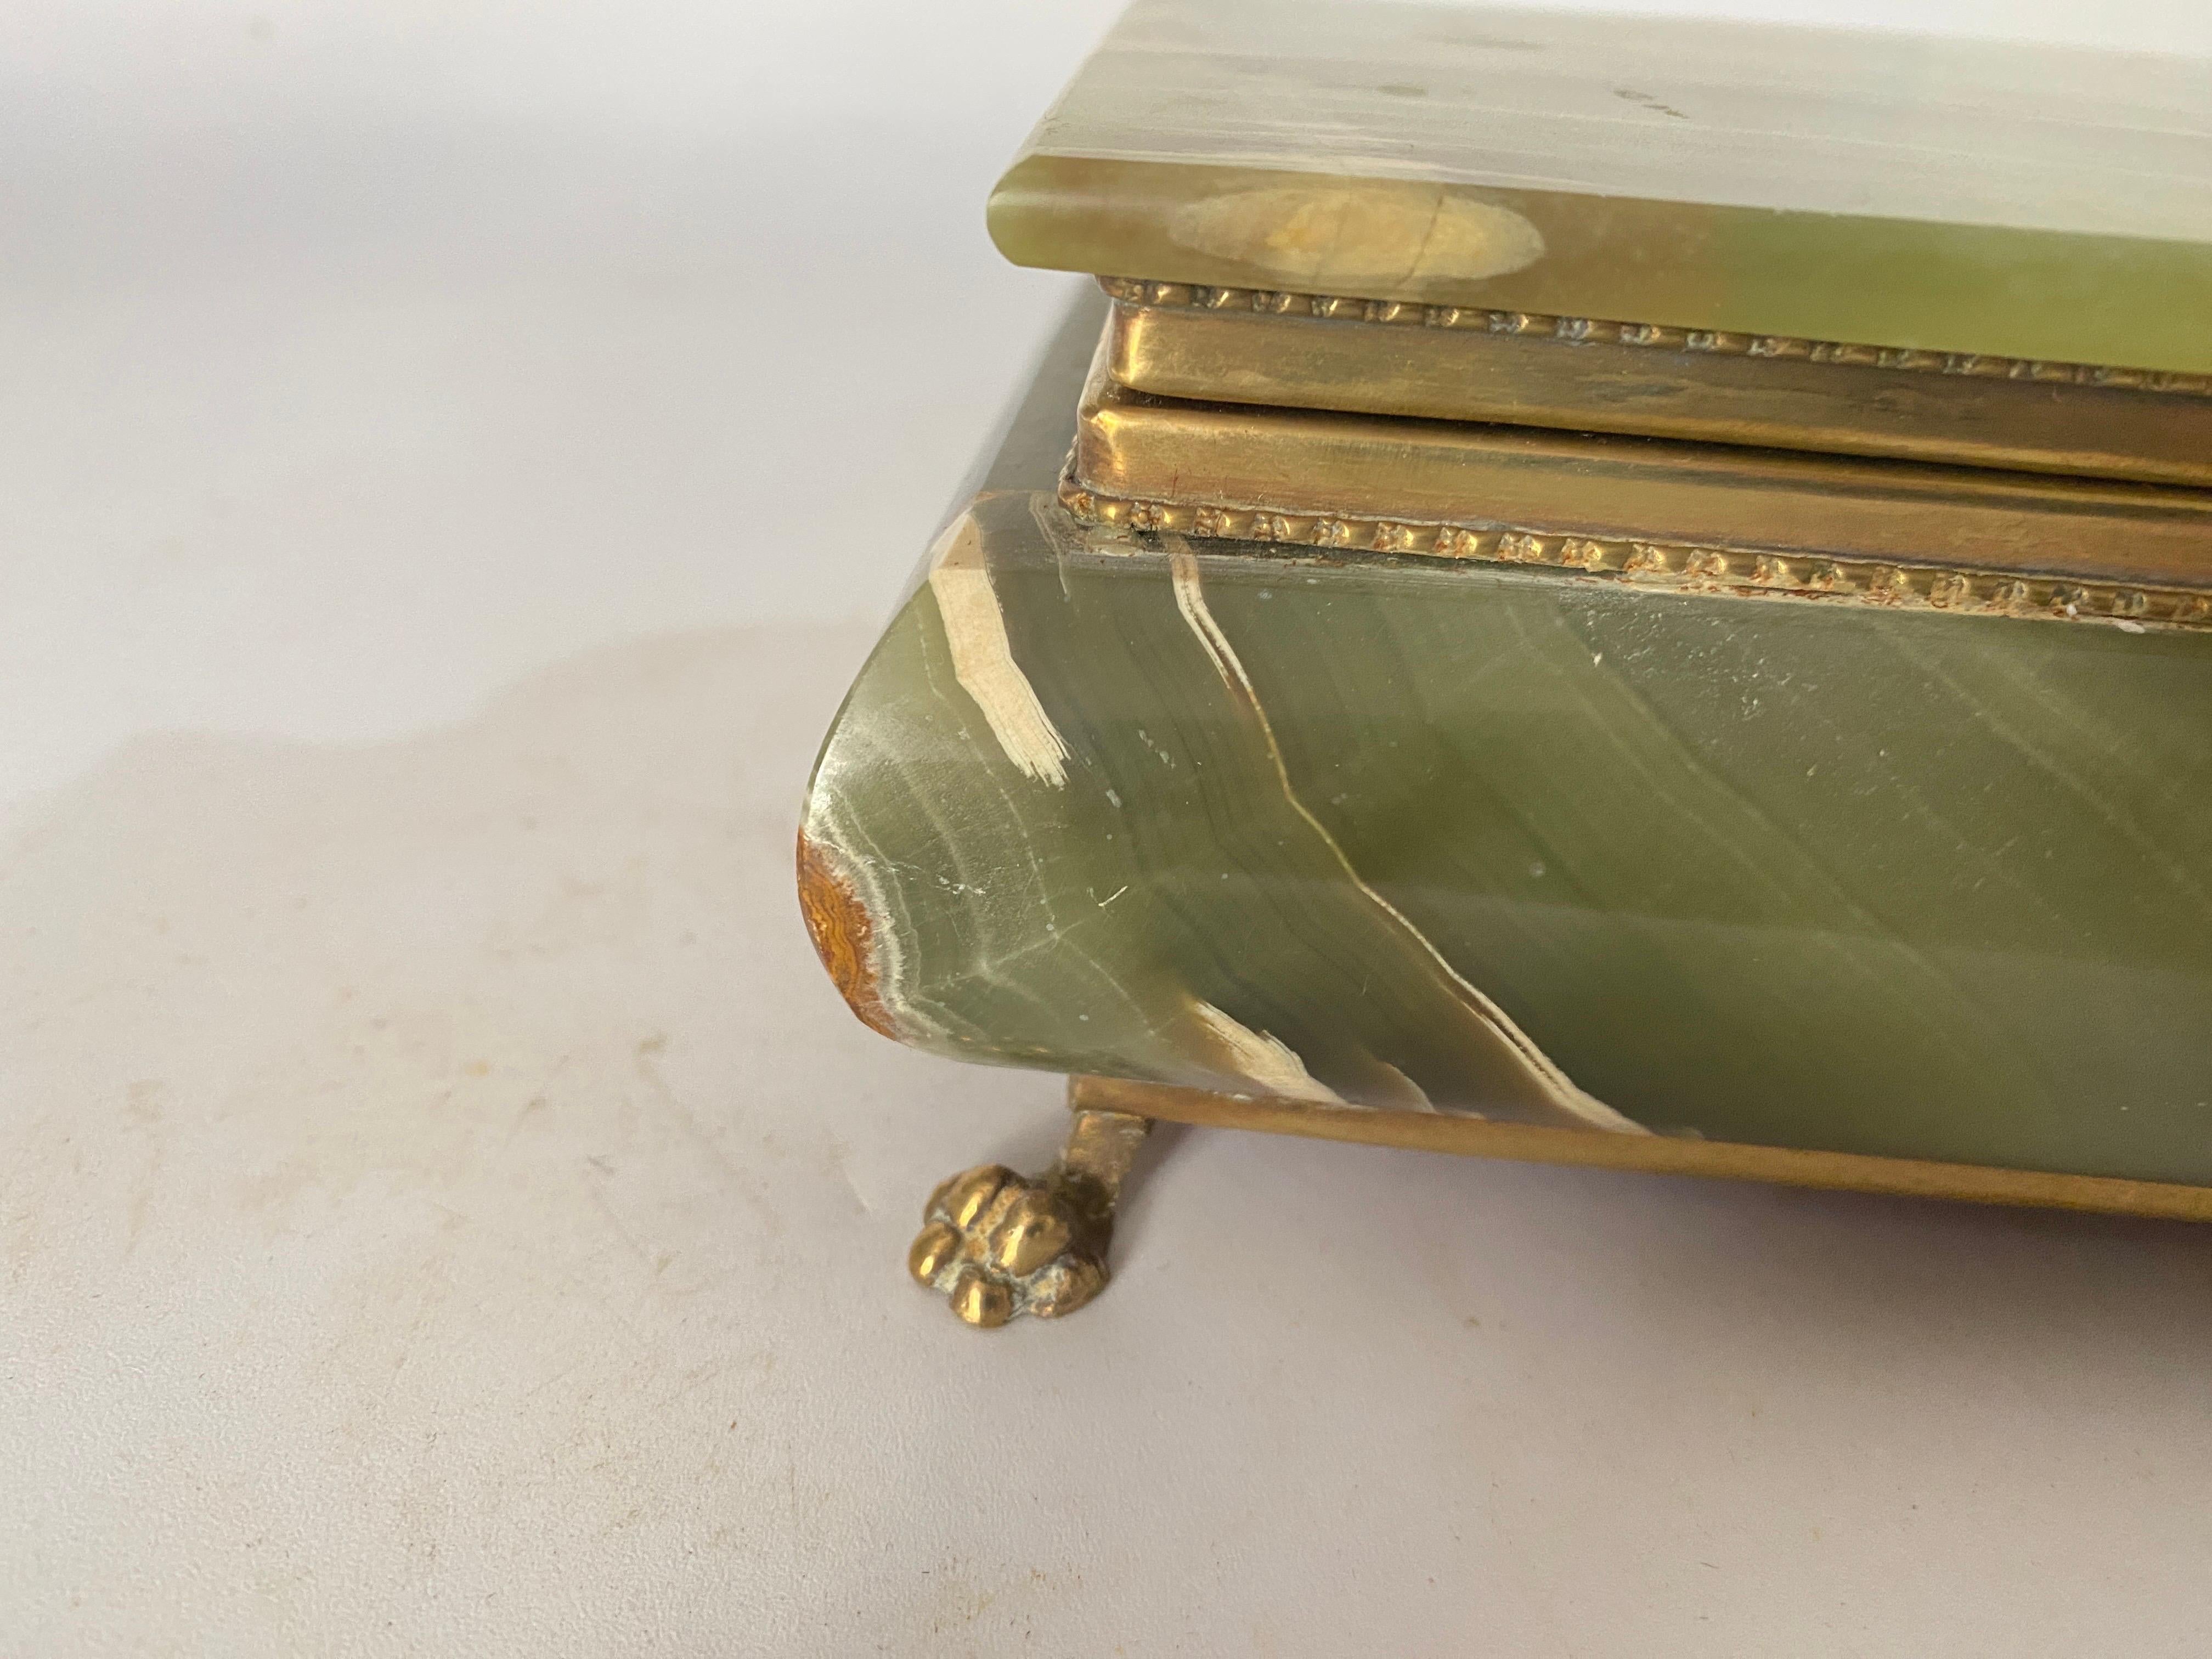  Green Onyx Marble and Brass Jewelry Display Box, Italy 1950 For Sale 5